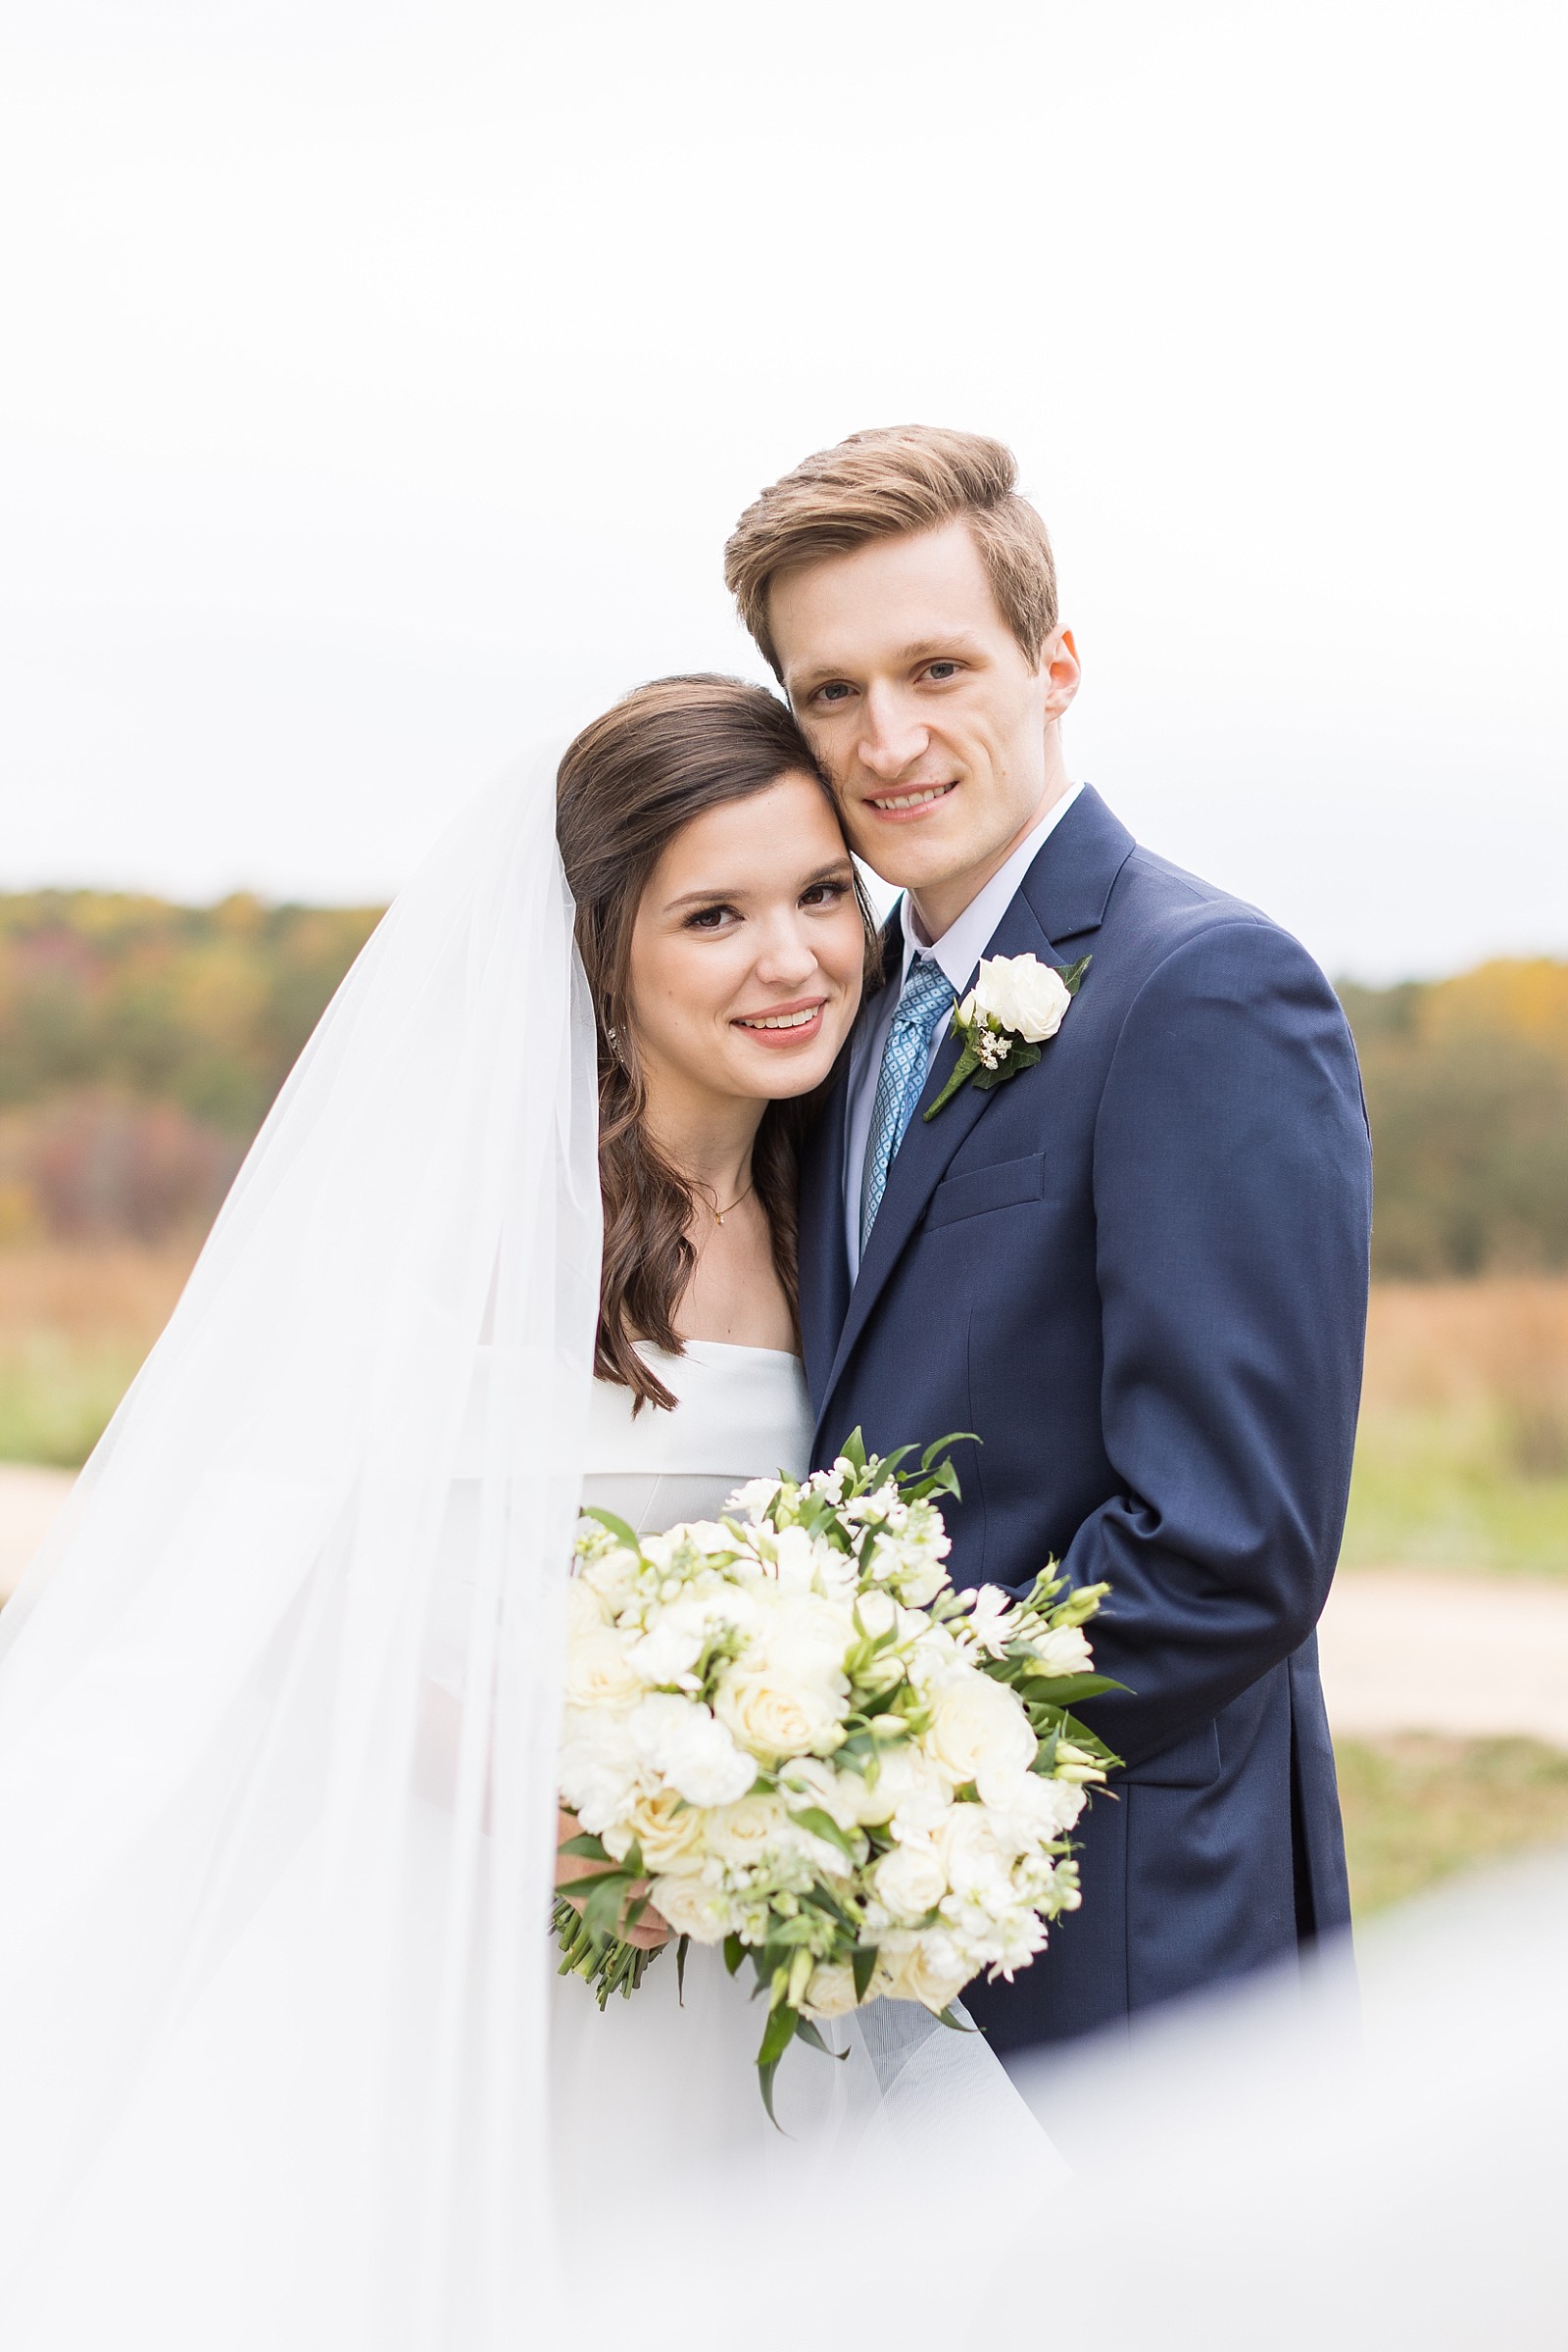 Bride and groom | Fall Wedding at The Meadows in Raleigh | Raleigh NC Wedding Photographer